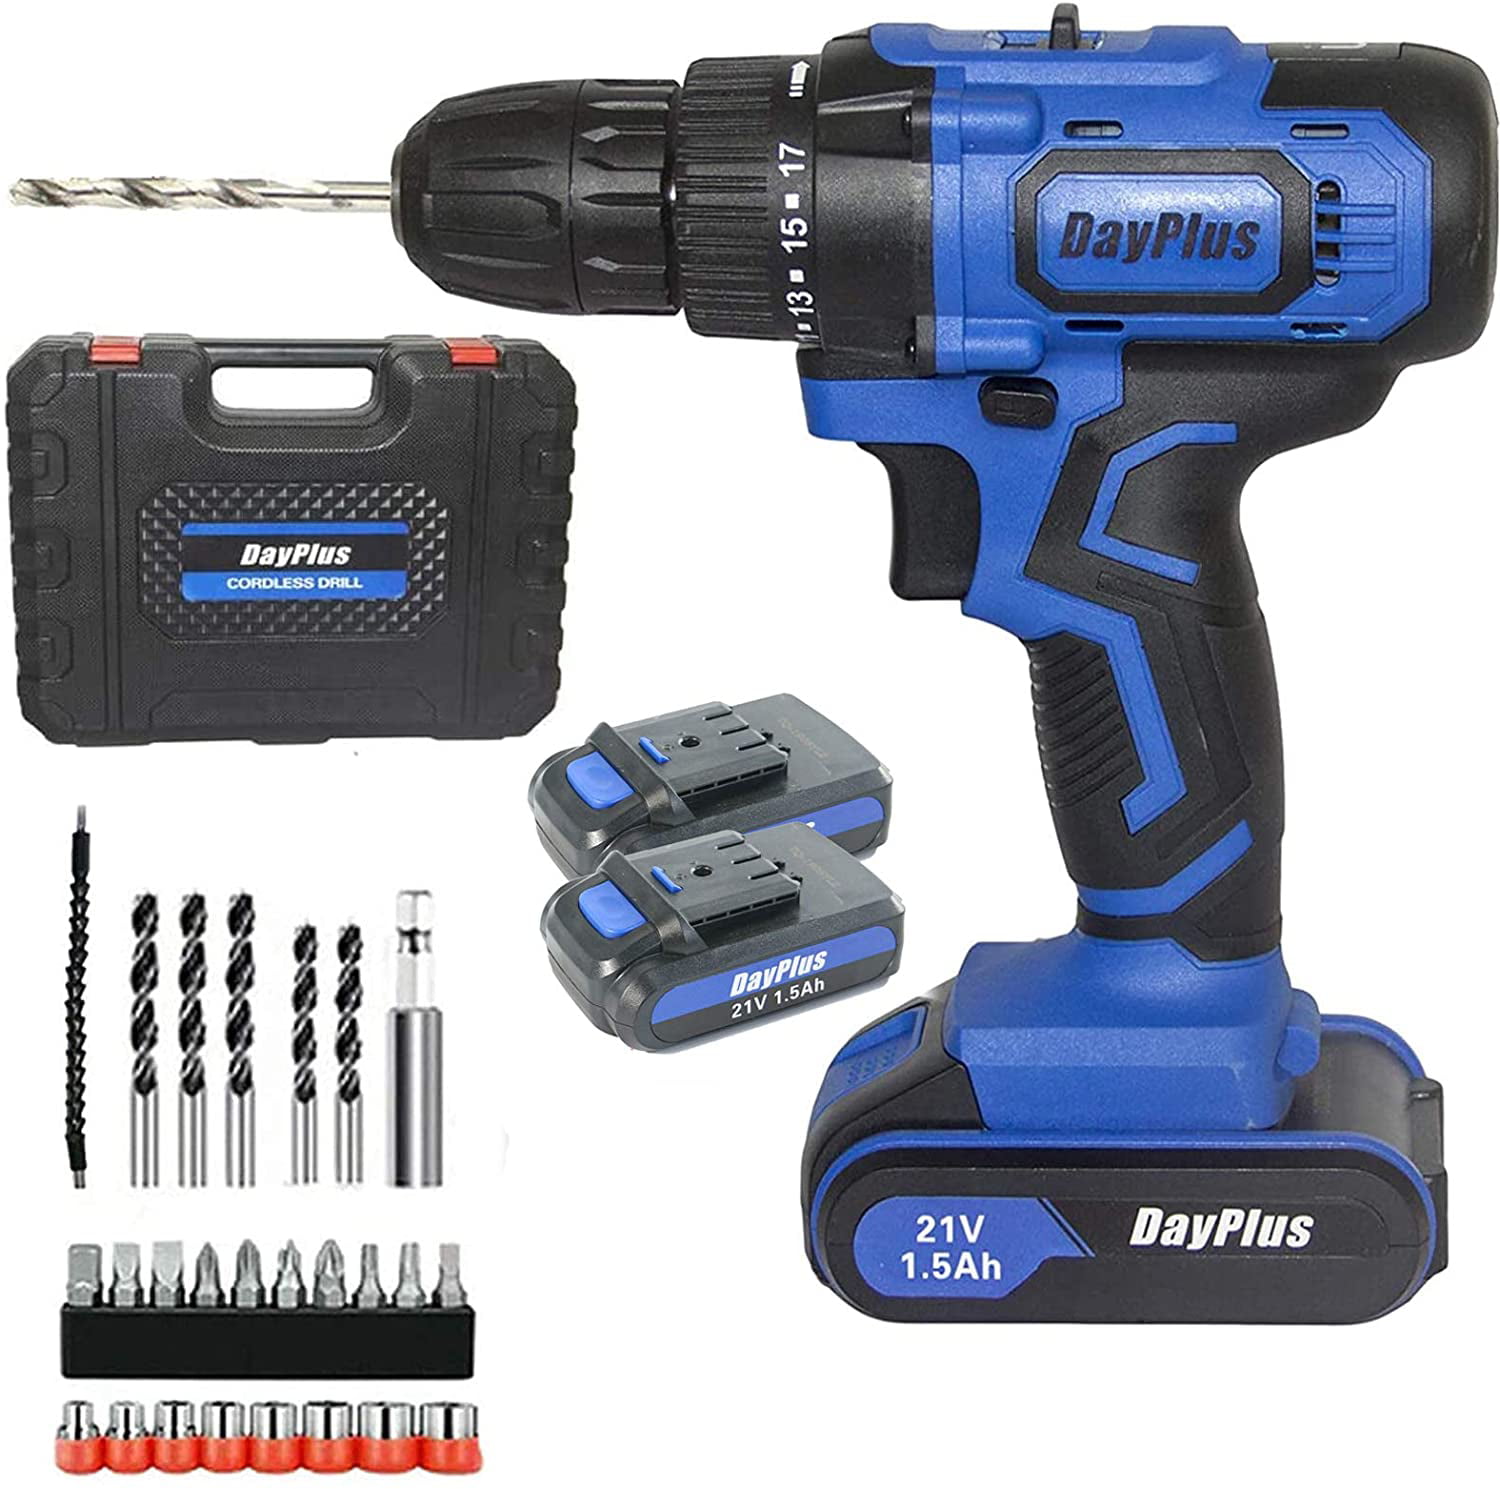 21V Electric Drill Screwdriver Set 29PCS Accessories Variable Speed 1500mAh with LED Work Light 2-Speed Trigger 45Nm Max Torque with Carry Case Cordless Drill with Battery and Charger